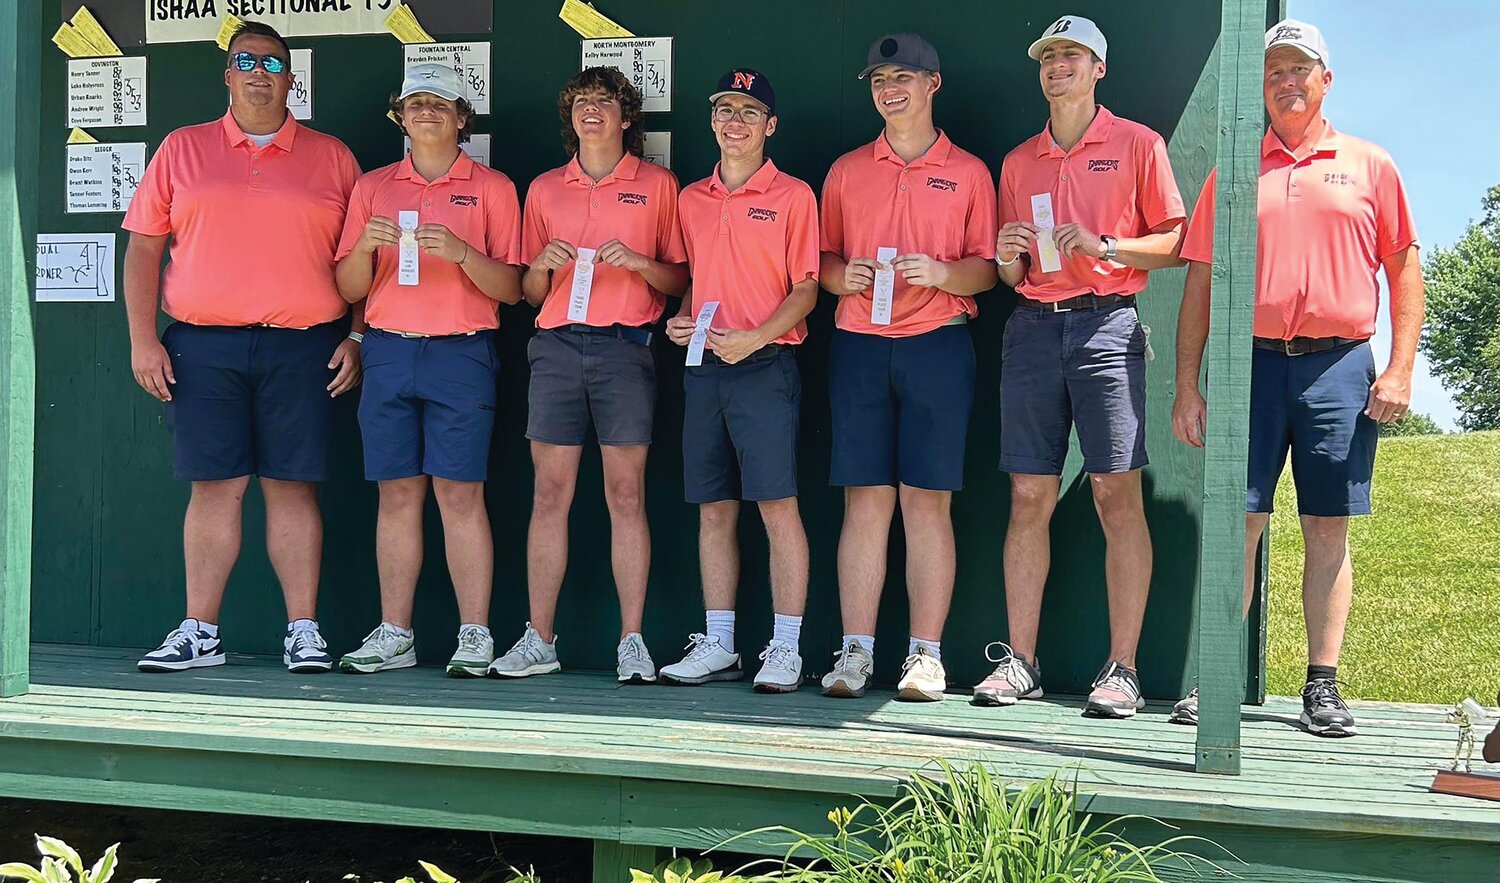 Bob Cox/Journal Review
North Montgomery boys golf advances out of the sectional as a team for the second straight year after the Chargers placed third at the sectional with a 342. Junior Neal Jeffery shot a 77 to lead the way.